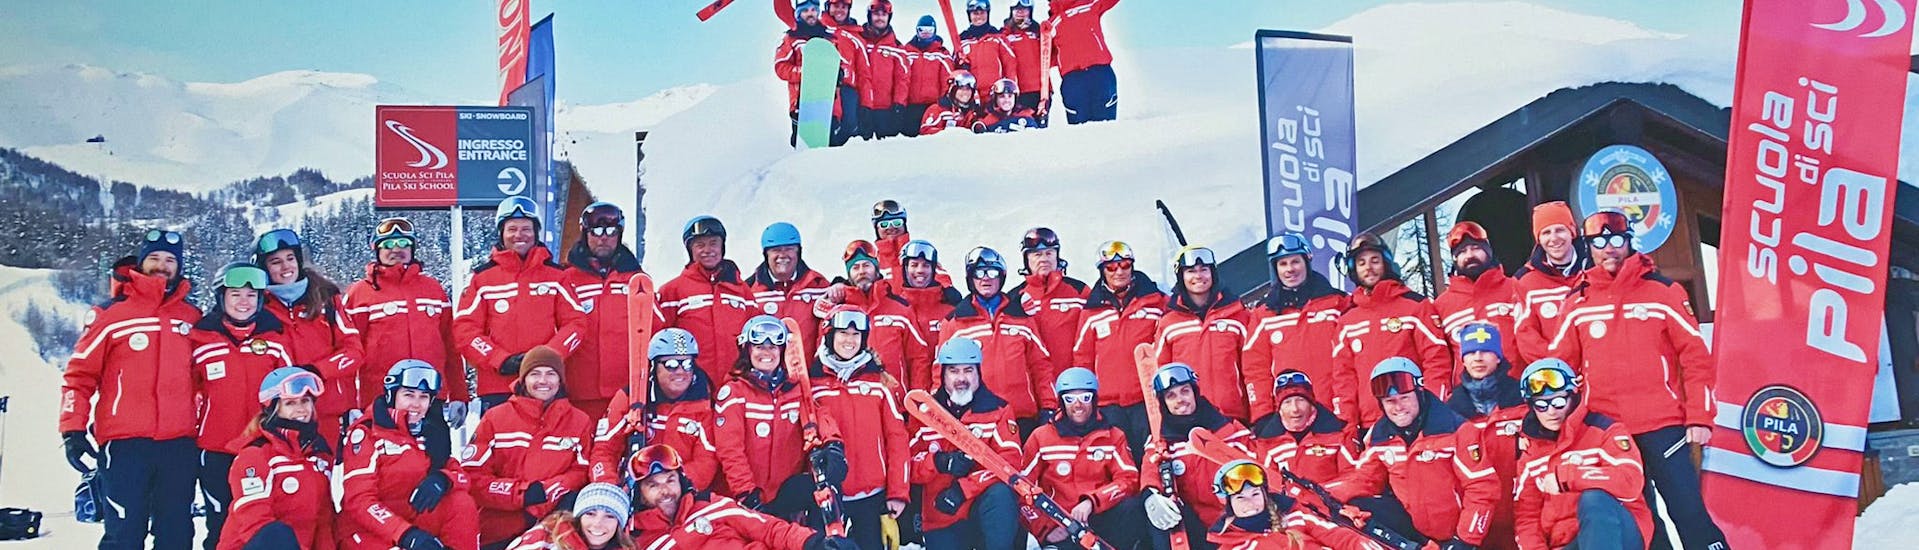 The instructors from Scuola di Sci Pila pose together in front of the camera after the Adult Ski Lessons for All Levels.